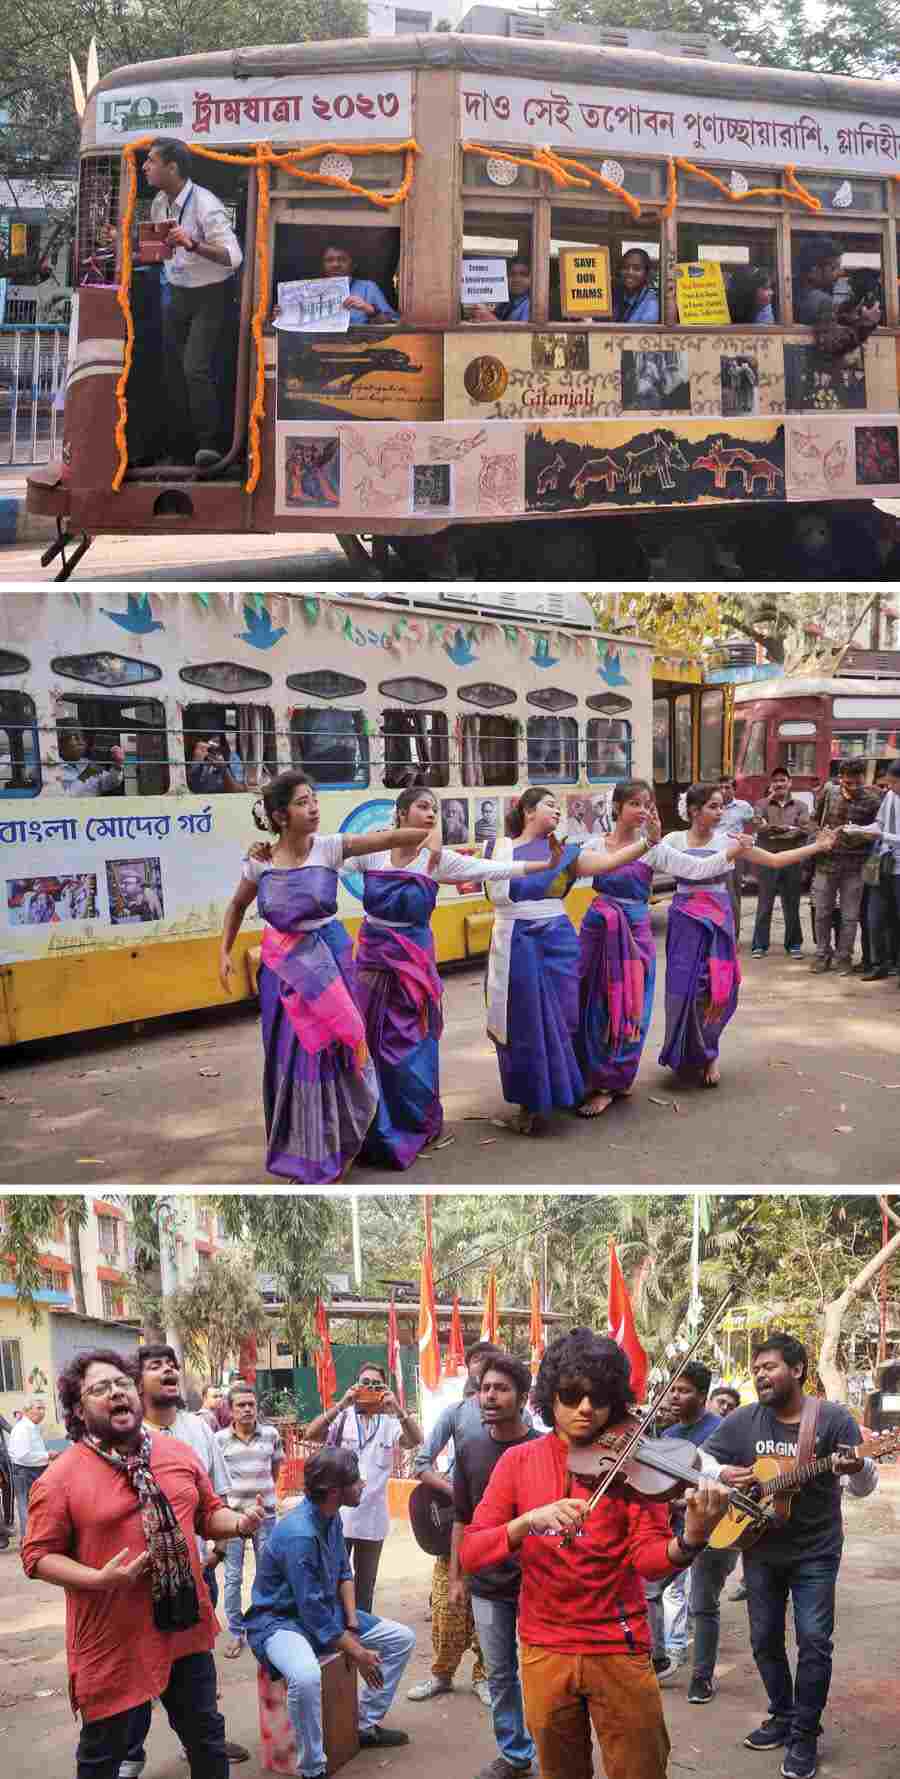 A tram parade was organised on Sunday morning from Gariahat tram depot to Shyambazar to celebrate 150 years of trams in Kolkata. The parade raised awareness about the need to save trams as they are an eco-friendly mode of transport. Trams dating back to the years between 1924 and 1975 were present at the parade. Singer Sidhu was among those who joined the parade 